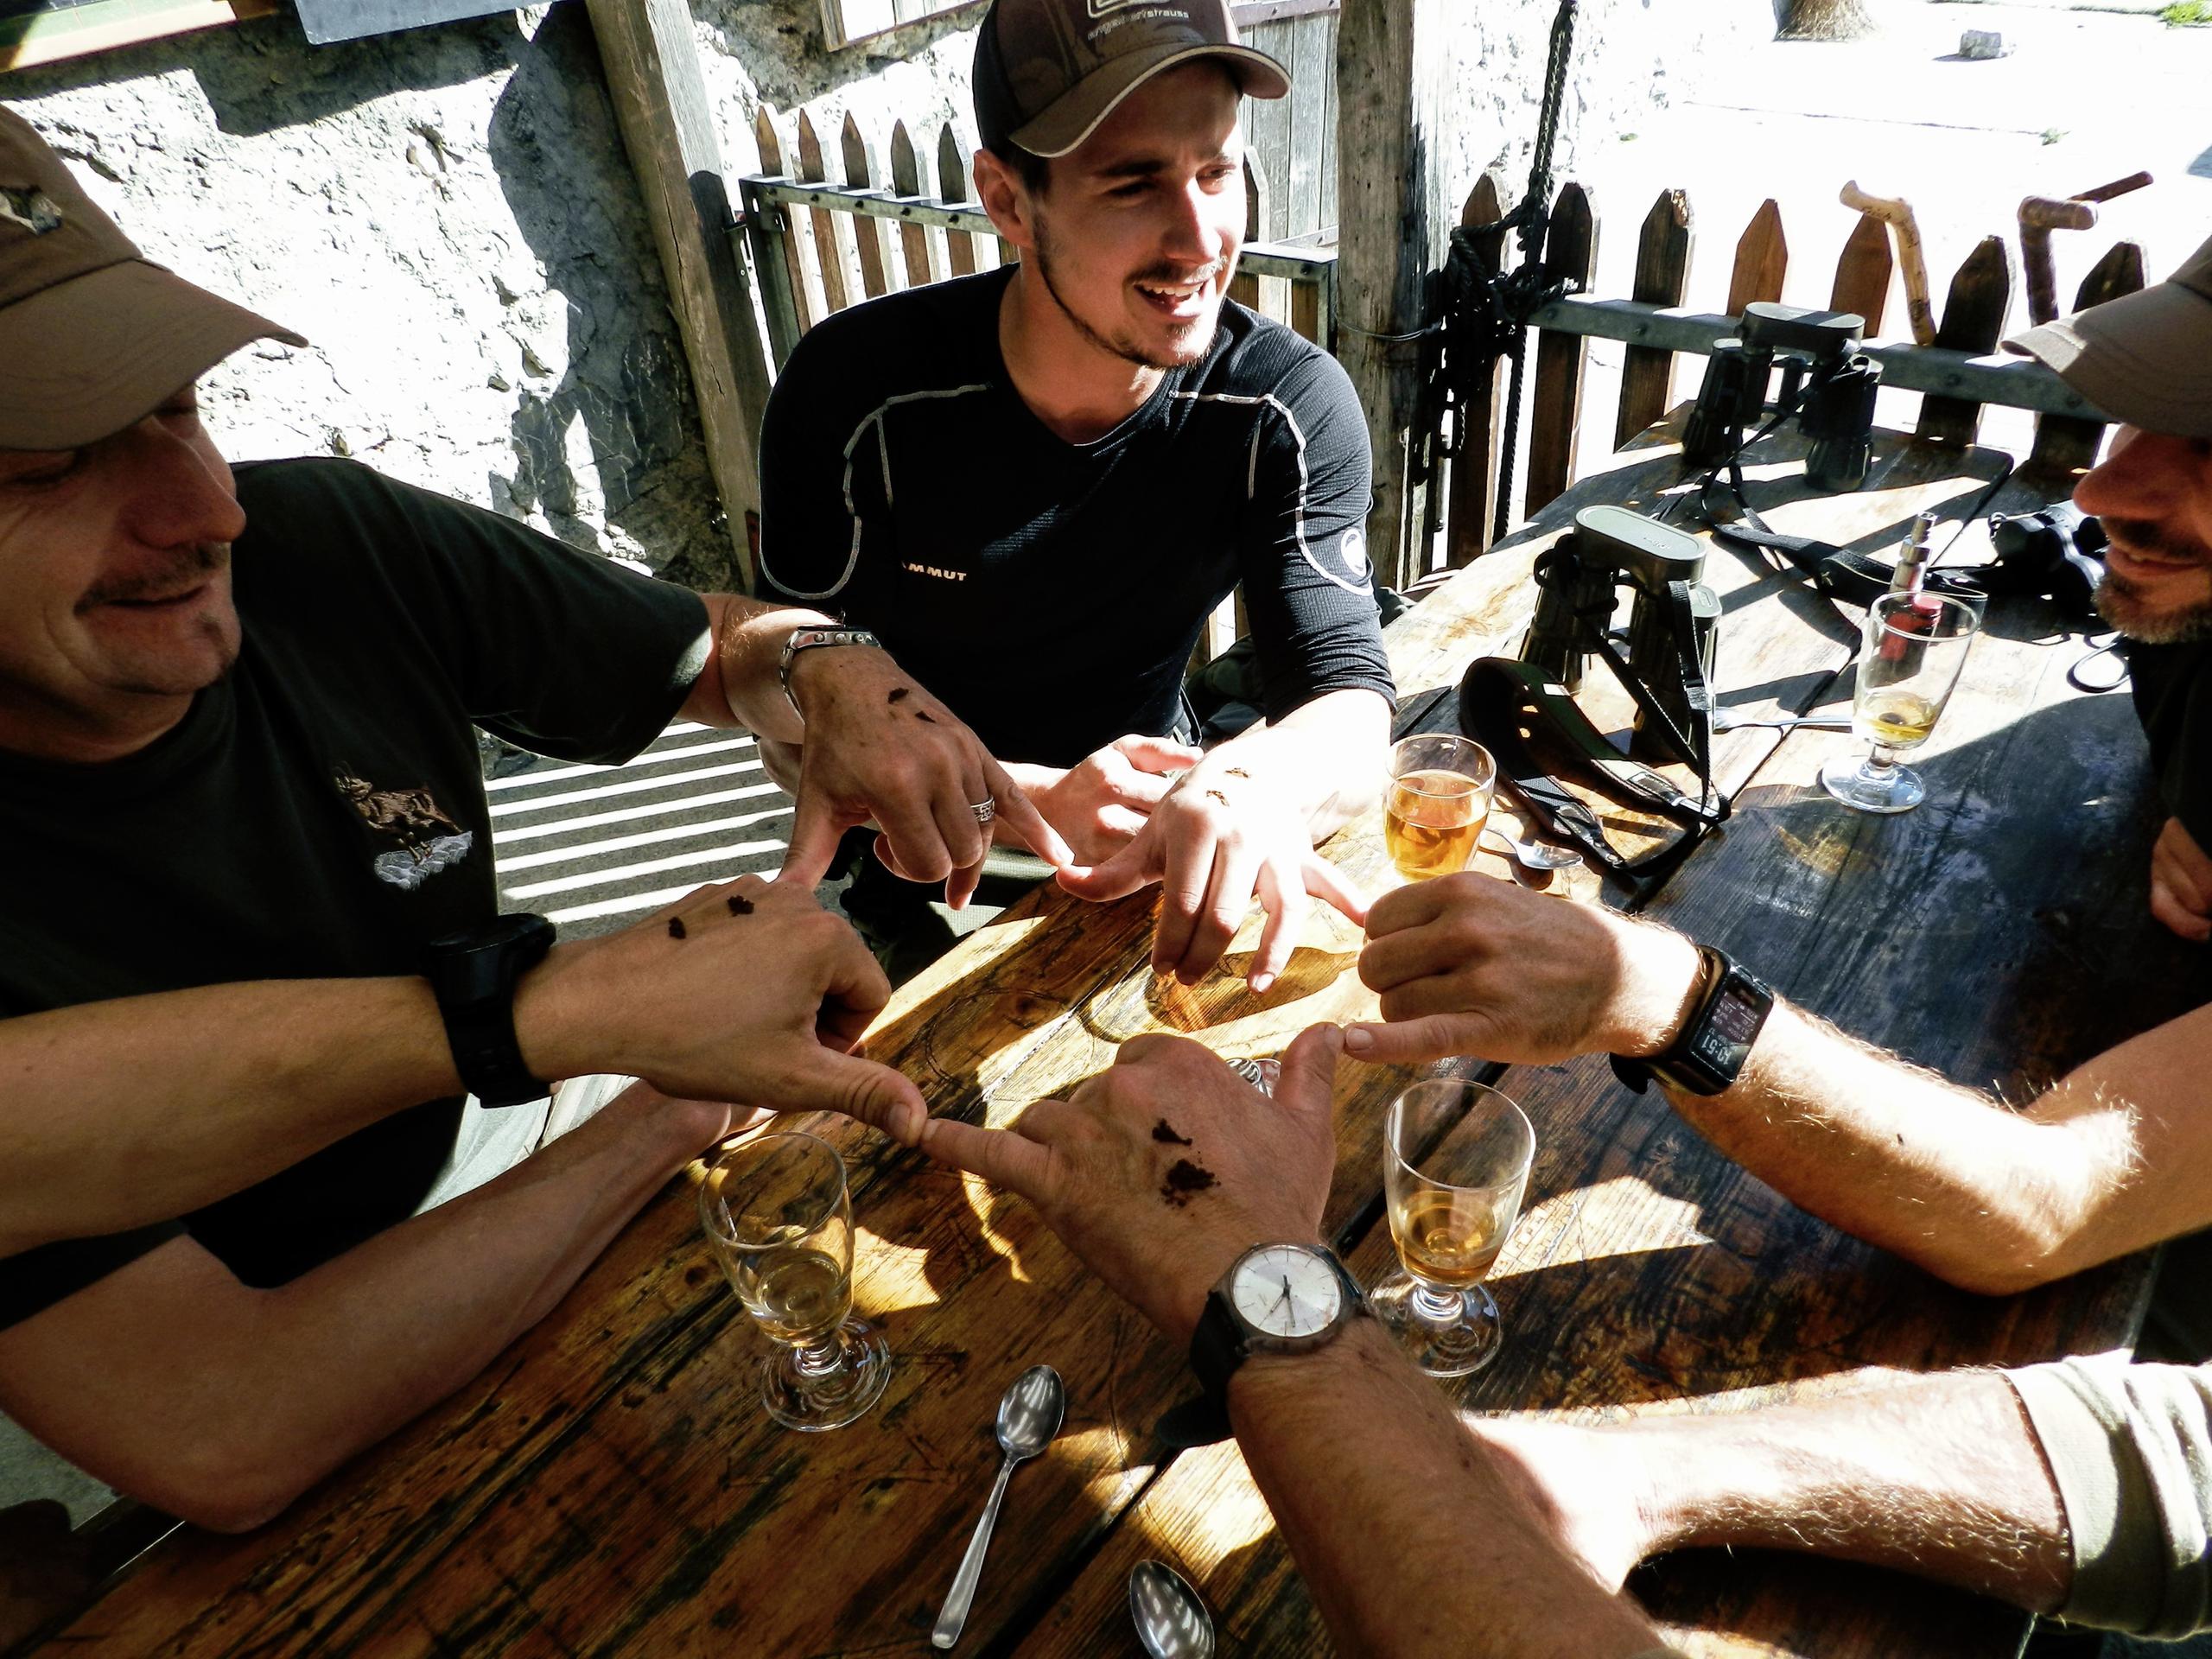 Men at outdoor table prepare a toast with snuff